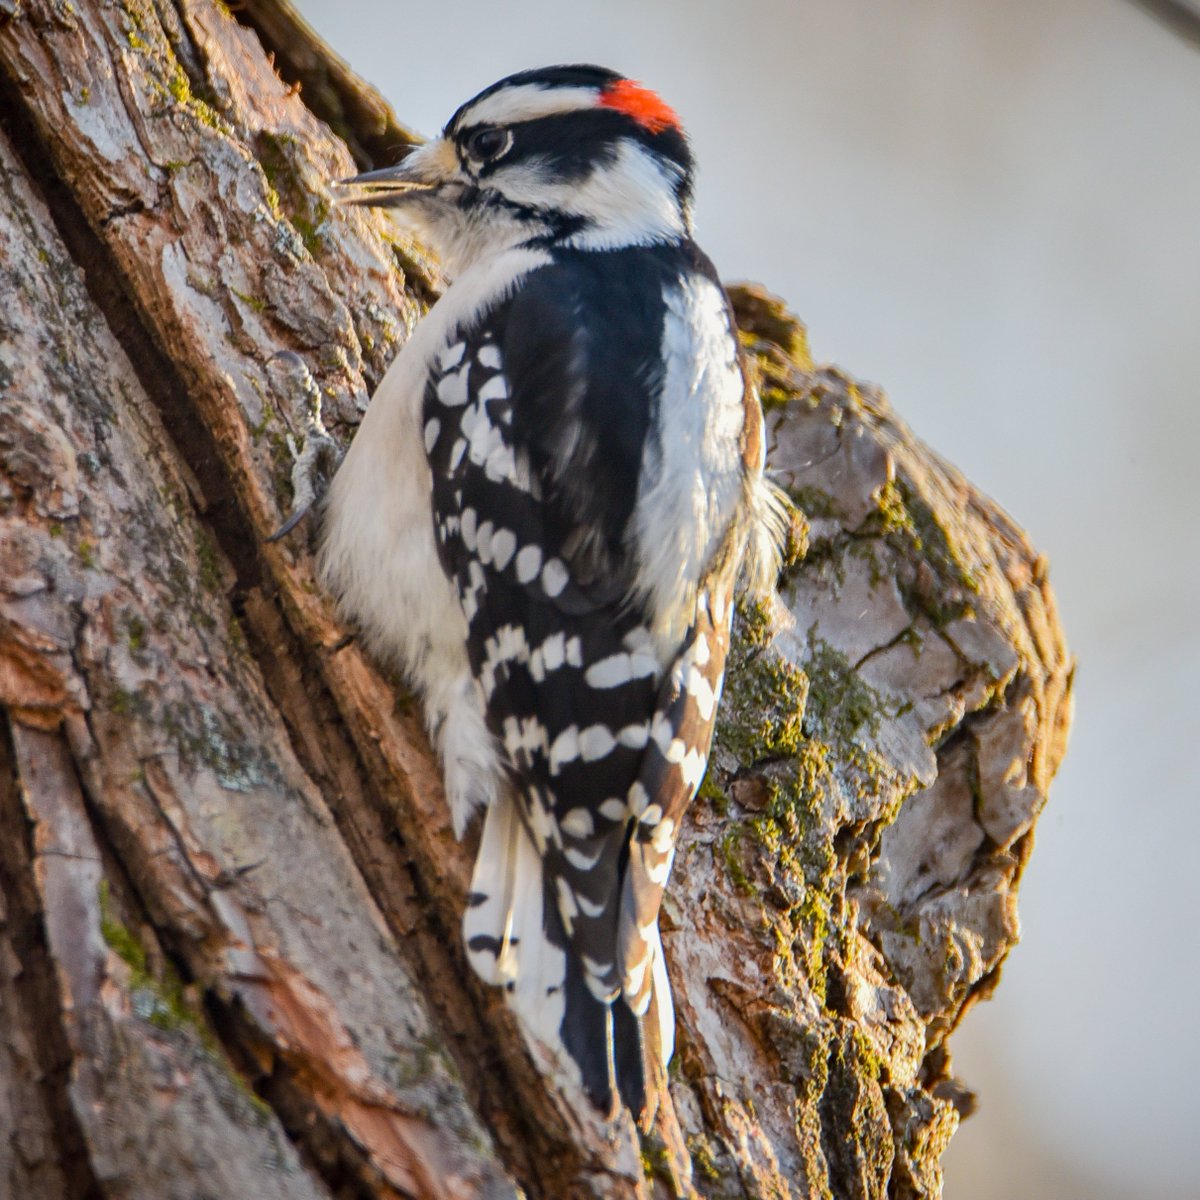 A Downy Woodpecker seconds after finding exactly what he was looking for.

#downywoodpecker #downywoodpeckers
#your_best_birds #marvelouz_animals_
#joyful_pics #total_birds
#eye_for_earth #stupefying_animals
#universal_bird #animal_captures
#nuts_about_birds #birdpose #birds